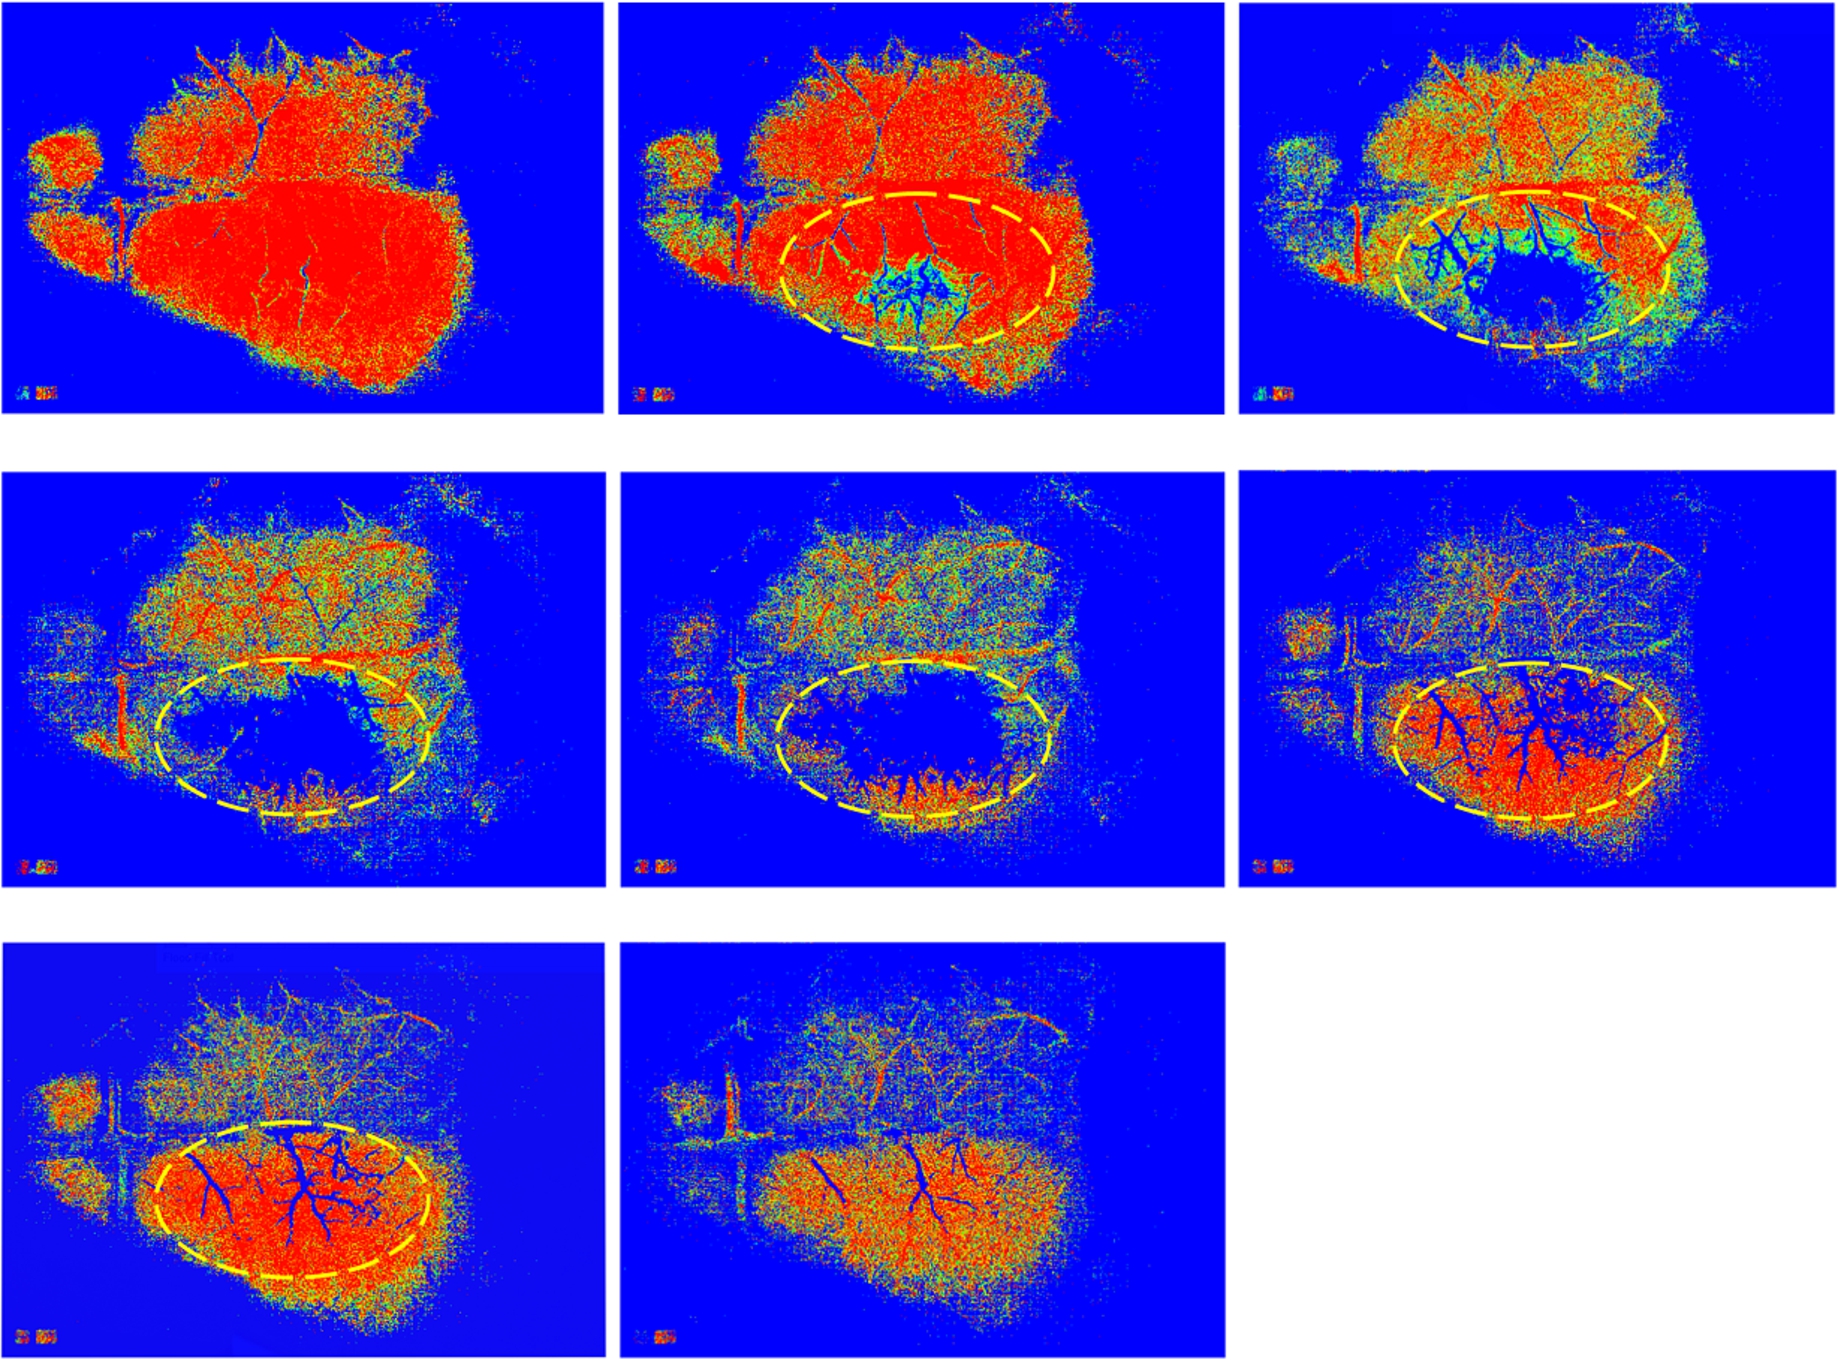 The MHIs showing clearly the areas with low perfusion in the right hemisphere of a mouse brain during induced occlusion of the middle cerebral artery (MCA). Each MHI was generated from a stack of DF images around a particular time point given in Fig. 2. For the computation of each MHI, a buffer of 8 images with a threshold value of 14 was used.